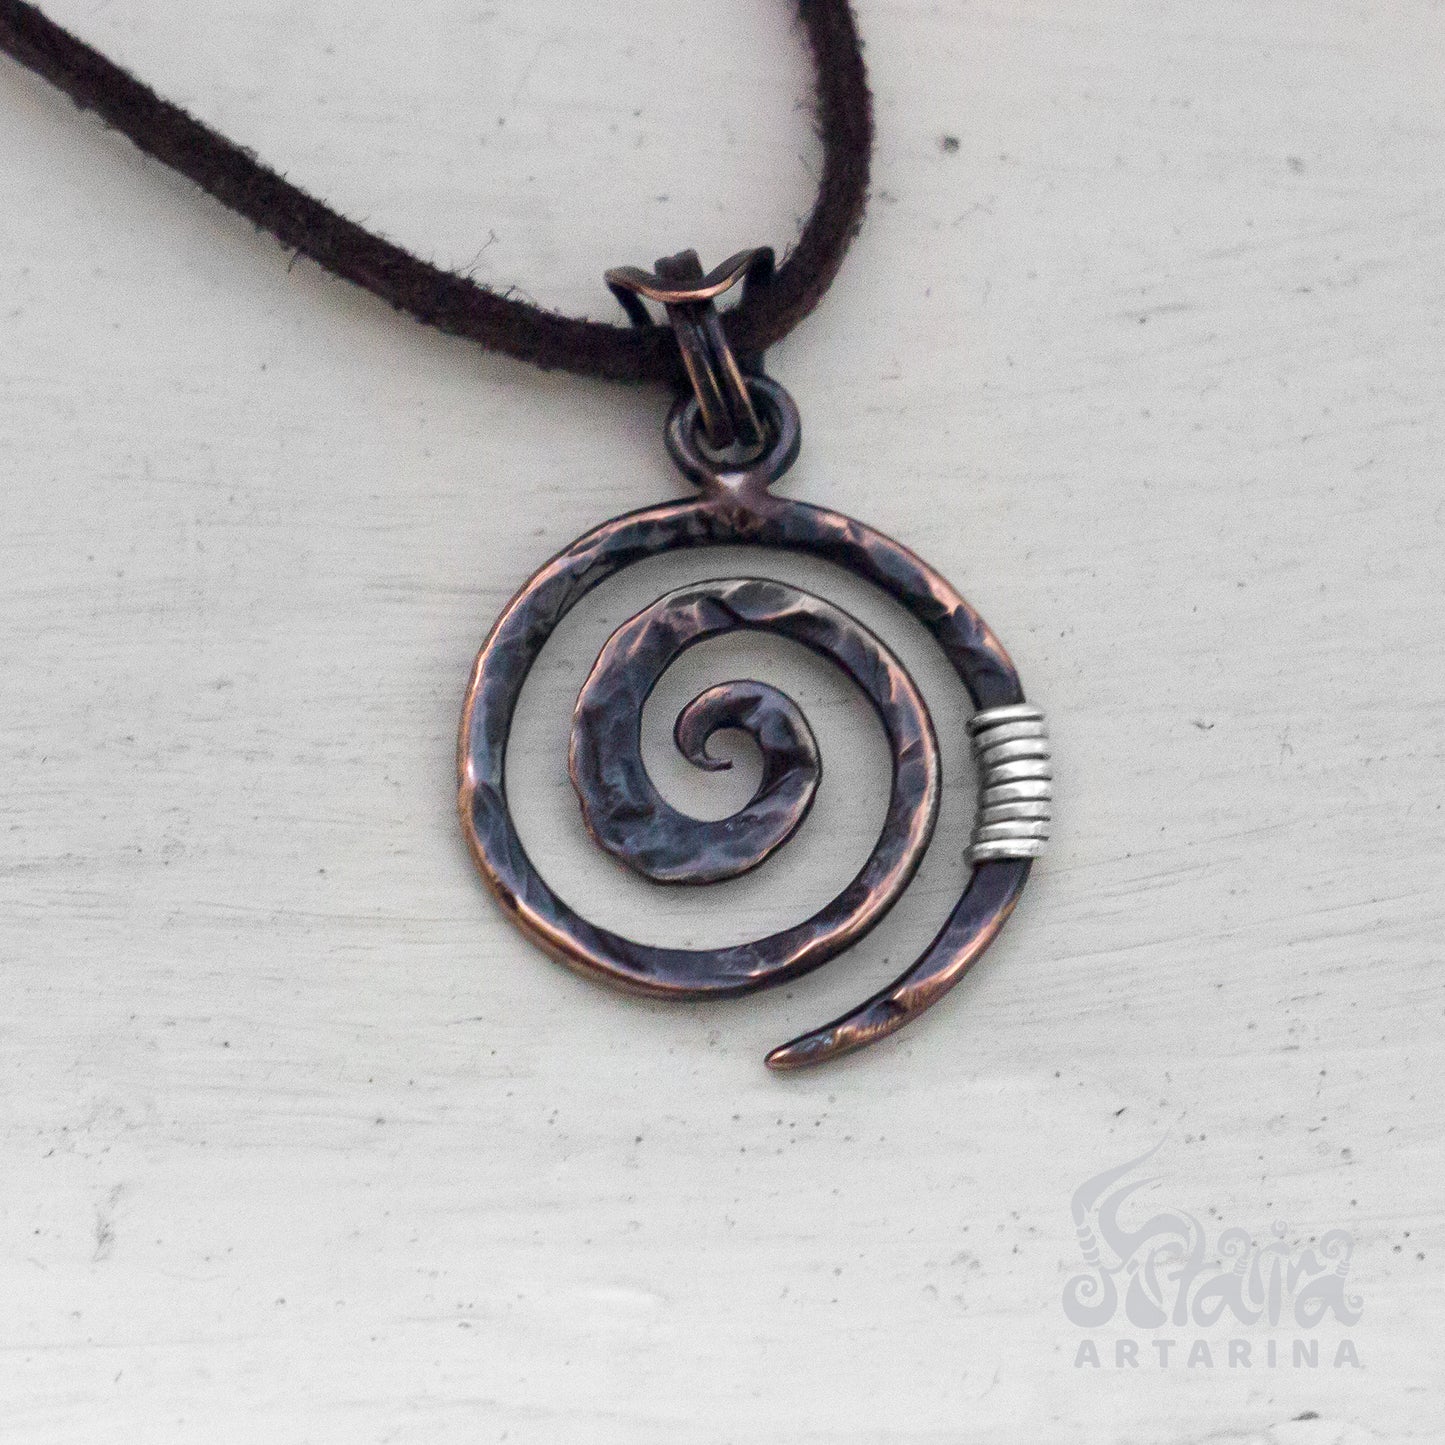 Oxidized rustic copper hammered spiral necklace / Rustic boho sacred symbol necklace pic 1